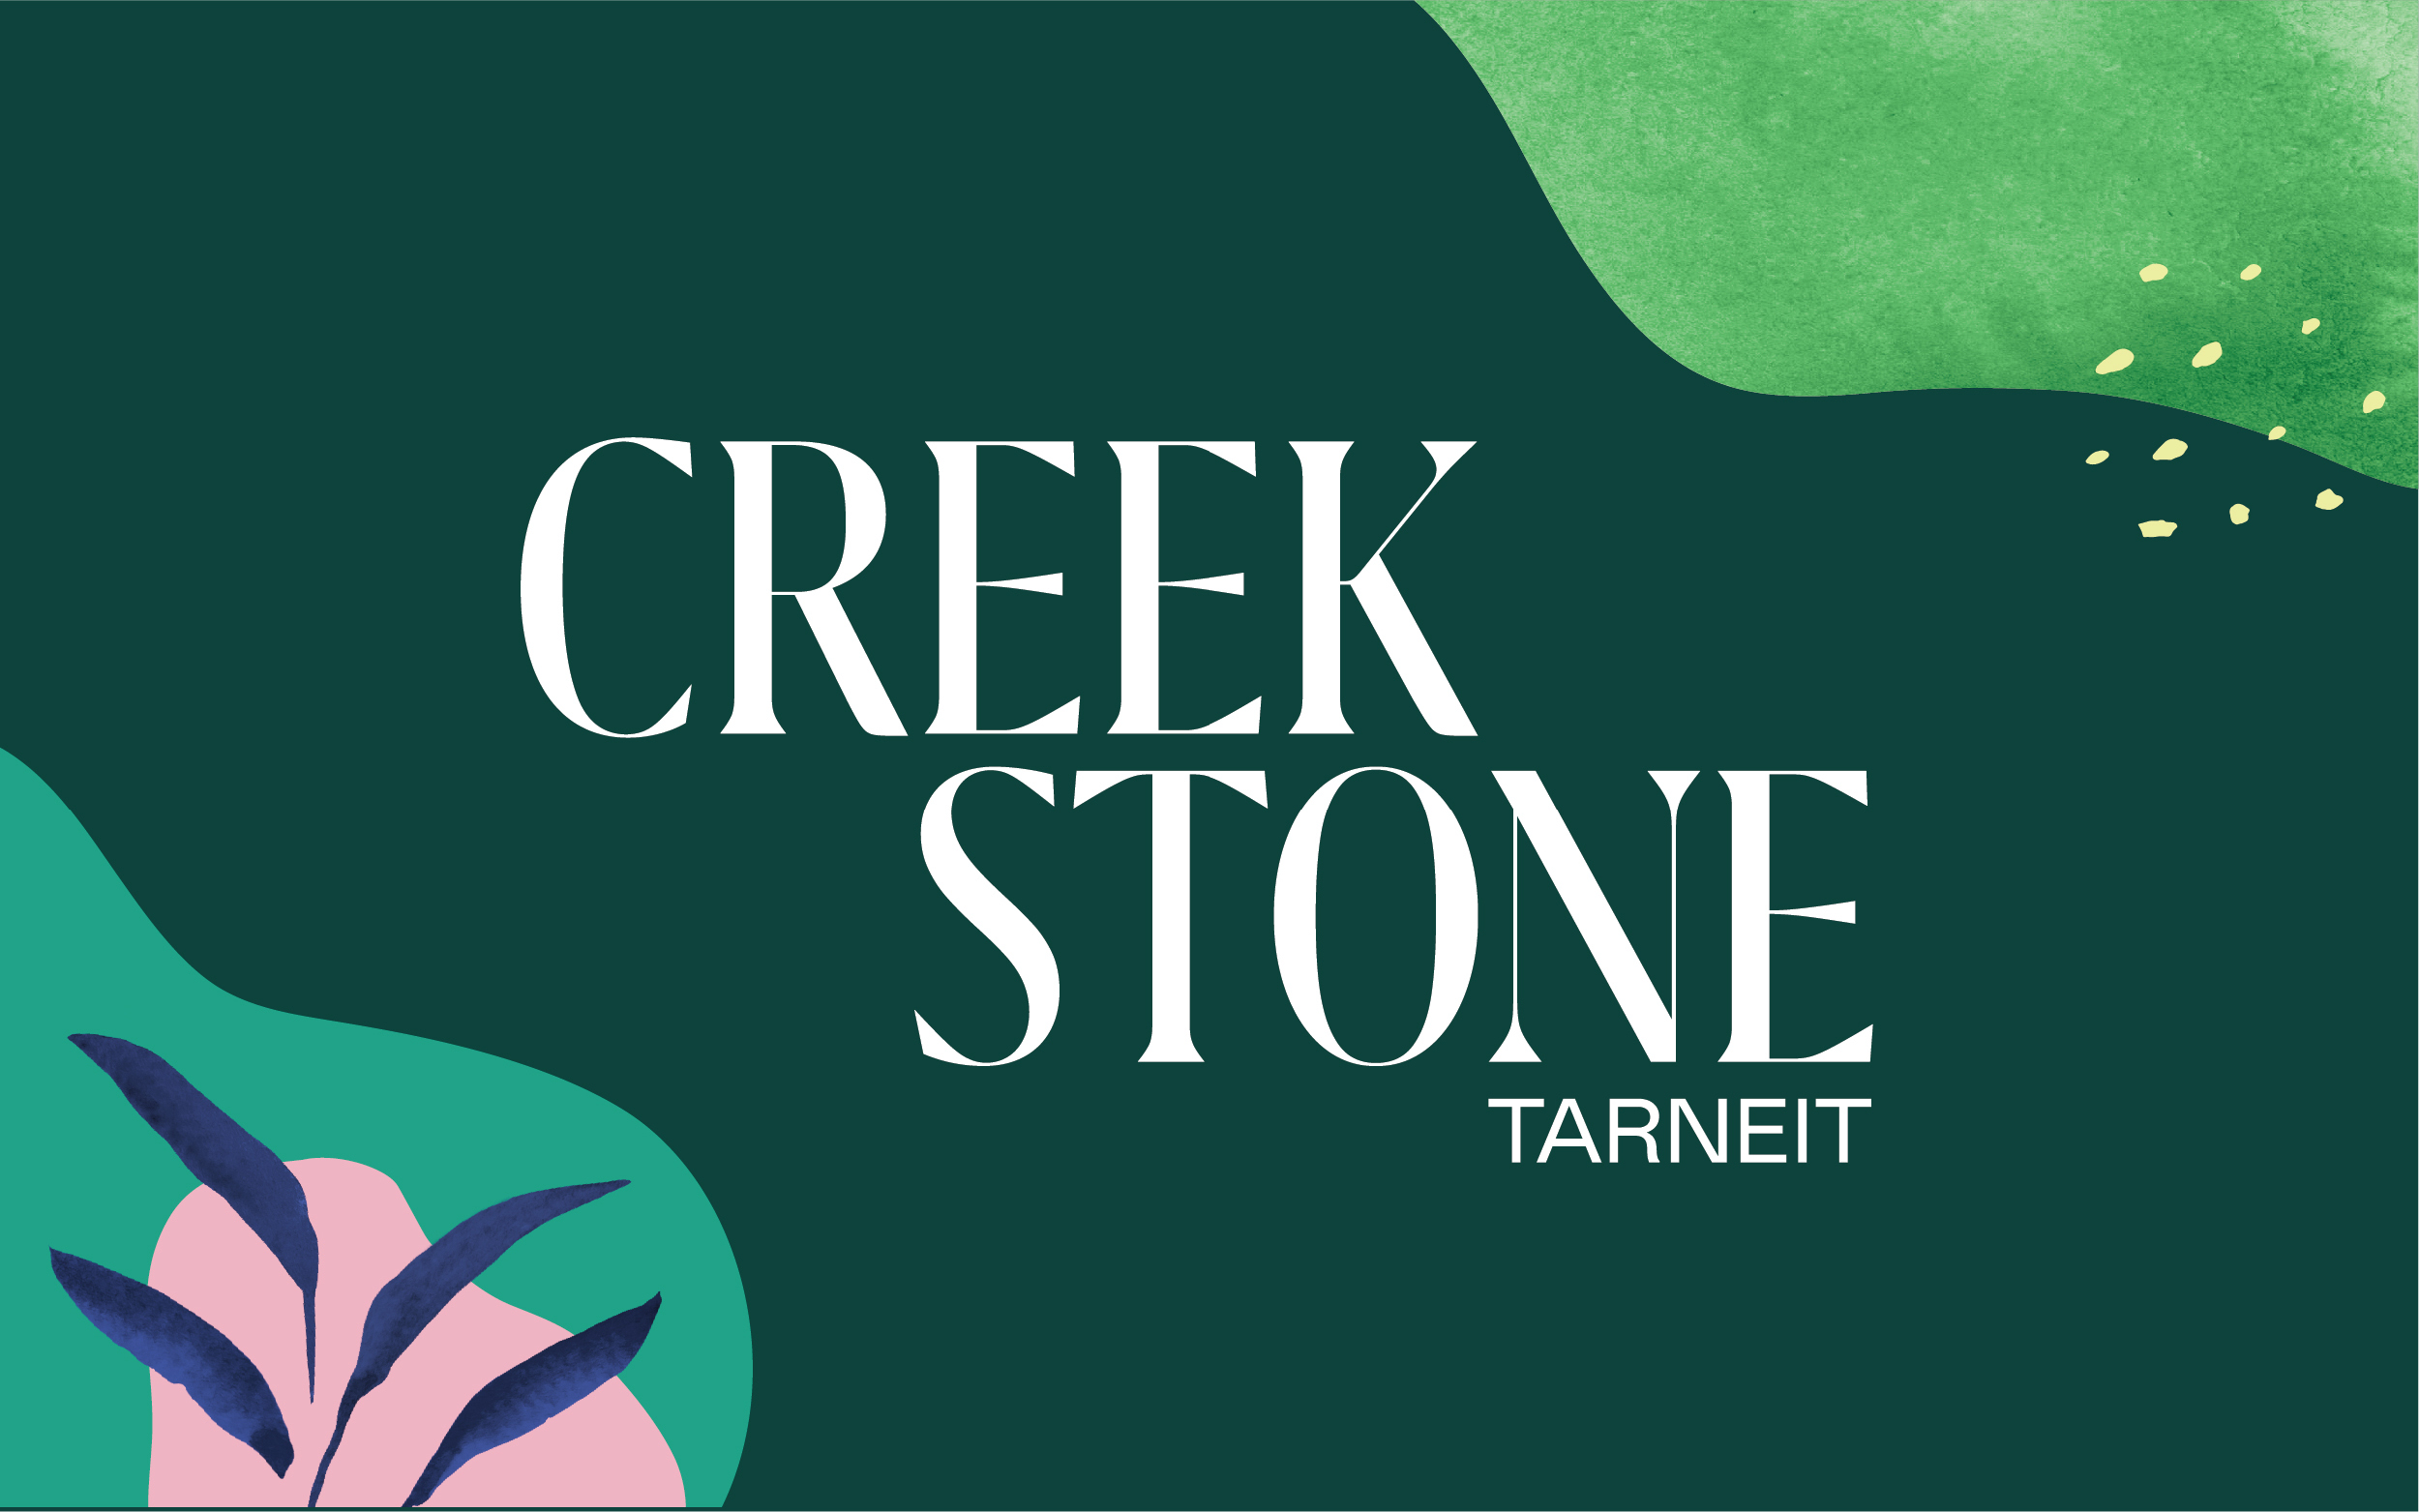 Creekstone logo - white text surrounded by nature illustrations